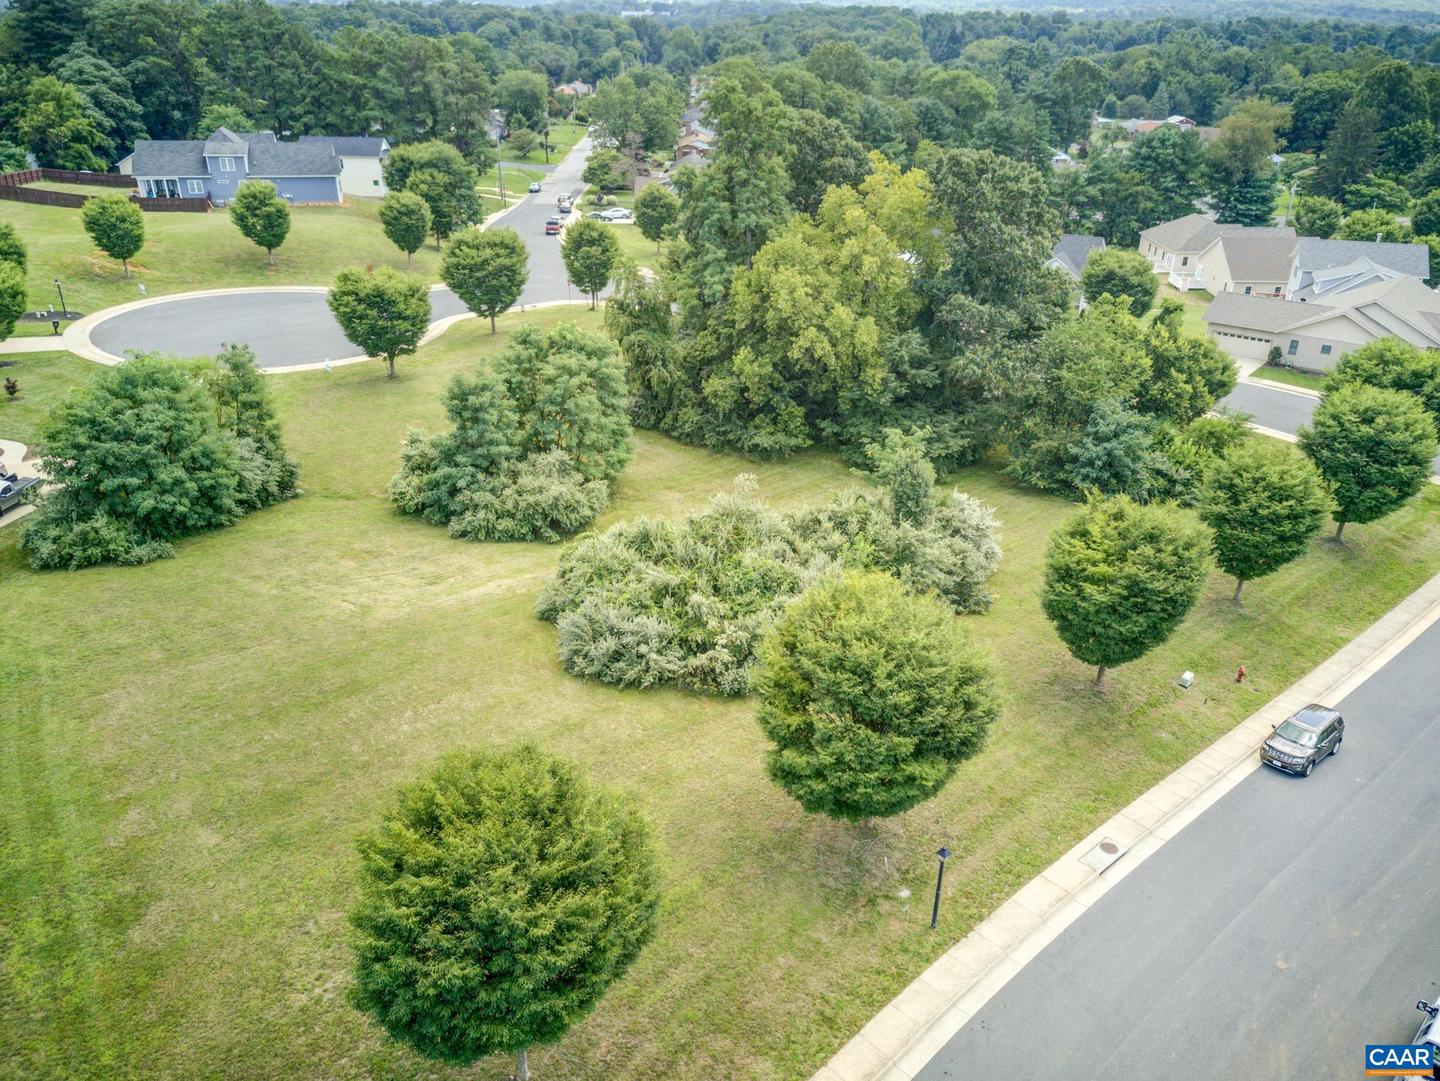 TBD FOREST DR #16, WAYNESBORO, Virginia 22980, ,Land,For sale,TBD FOREST DR #16,644744 MLS # 644744